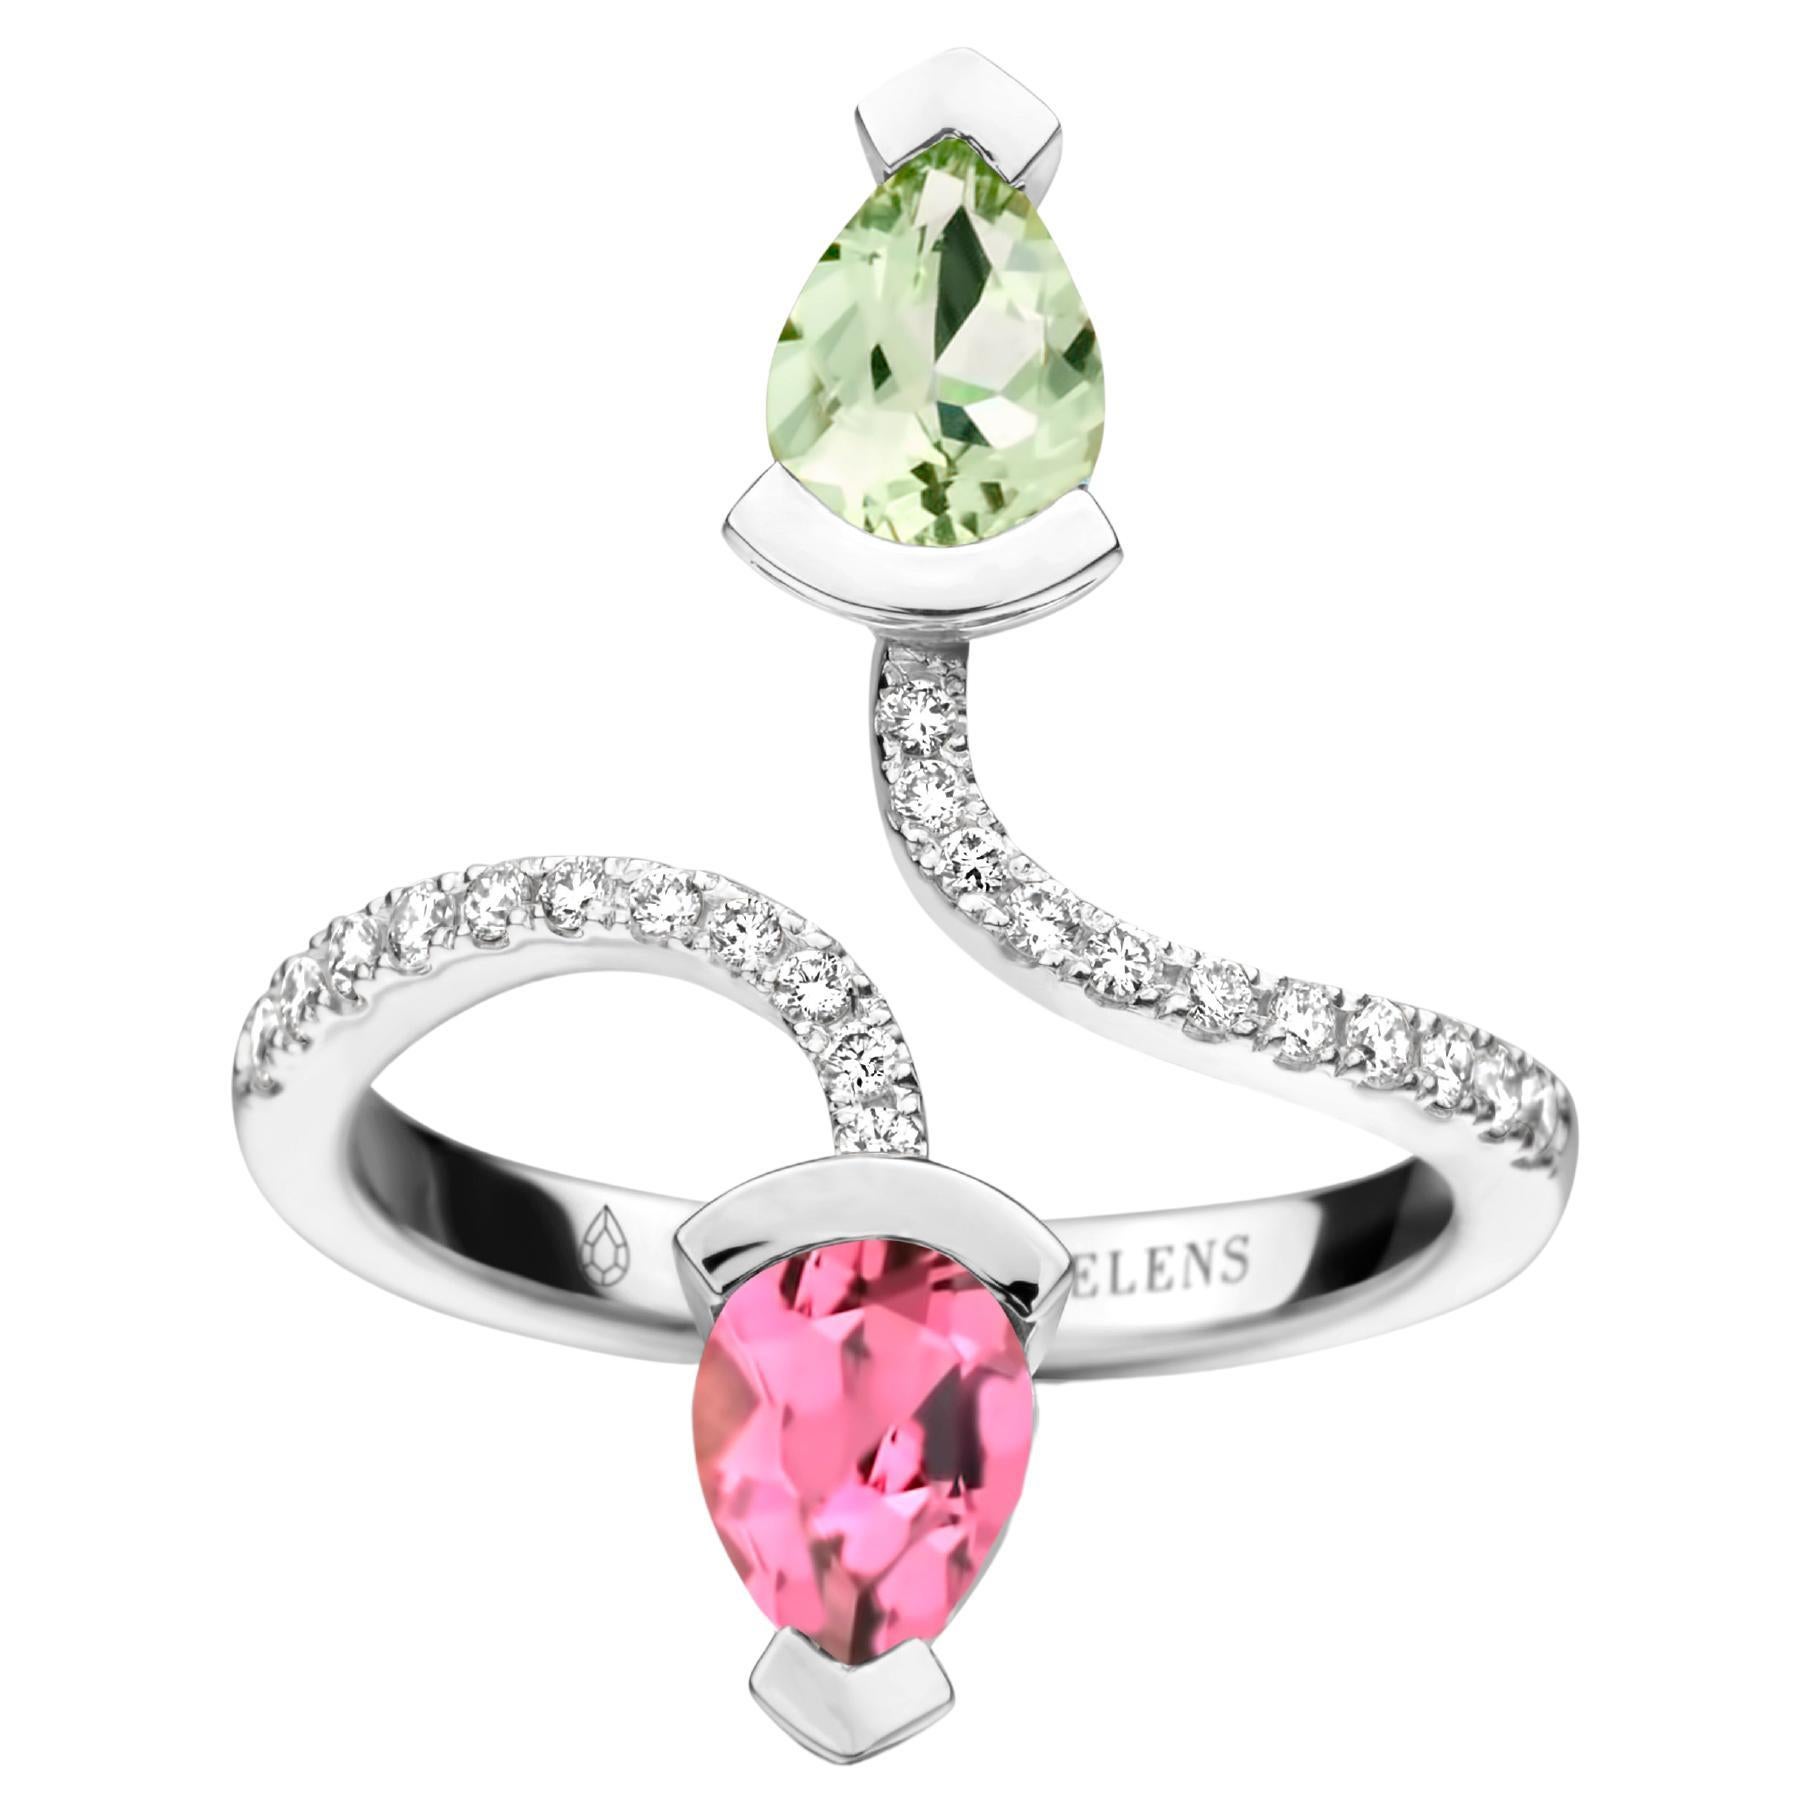 Green Beryl And Pink Tourmaline White Gold Diamond Cocktail Ring For Sale